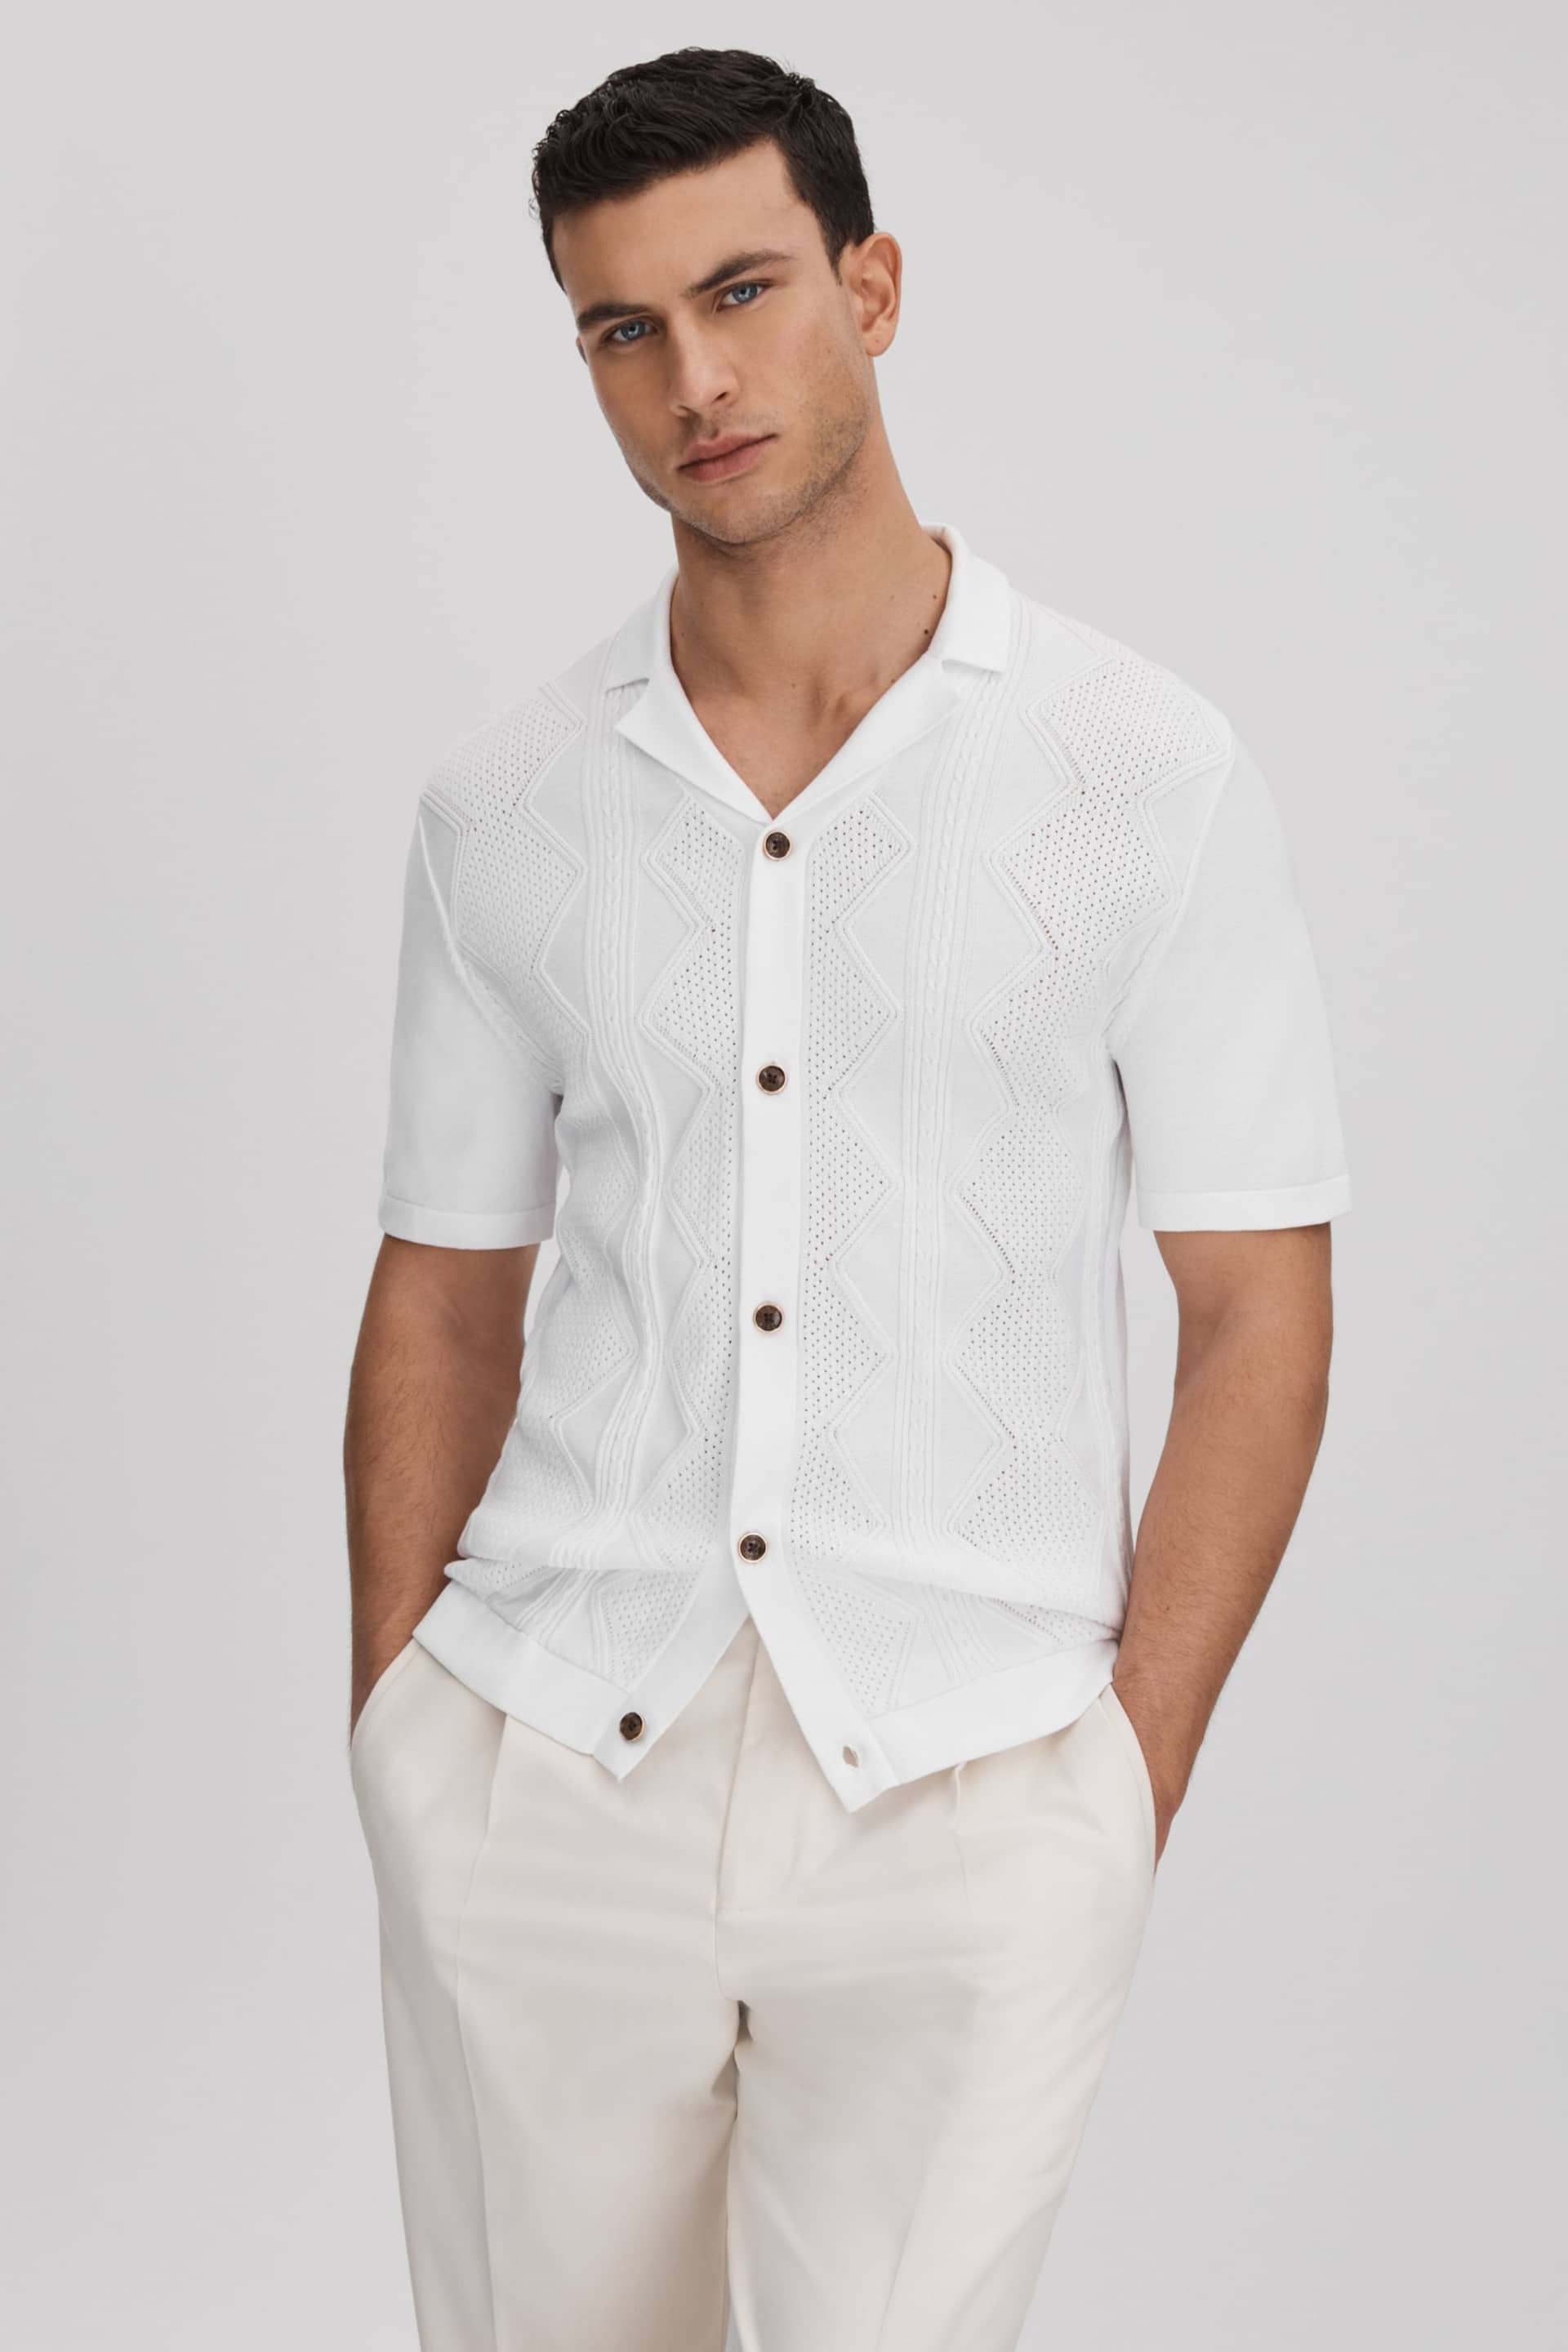 Reiss White Fortune Cable Knit Cuban Collar Shirt - Image 1 of 6